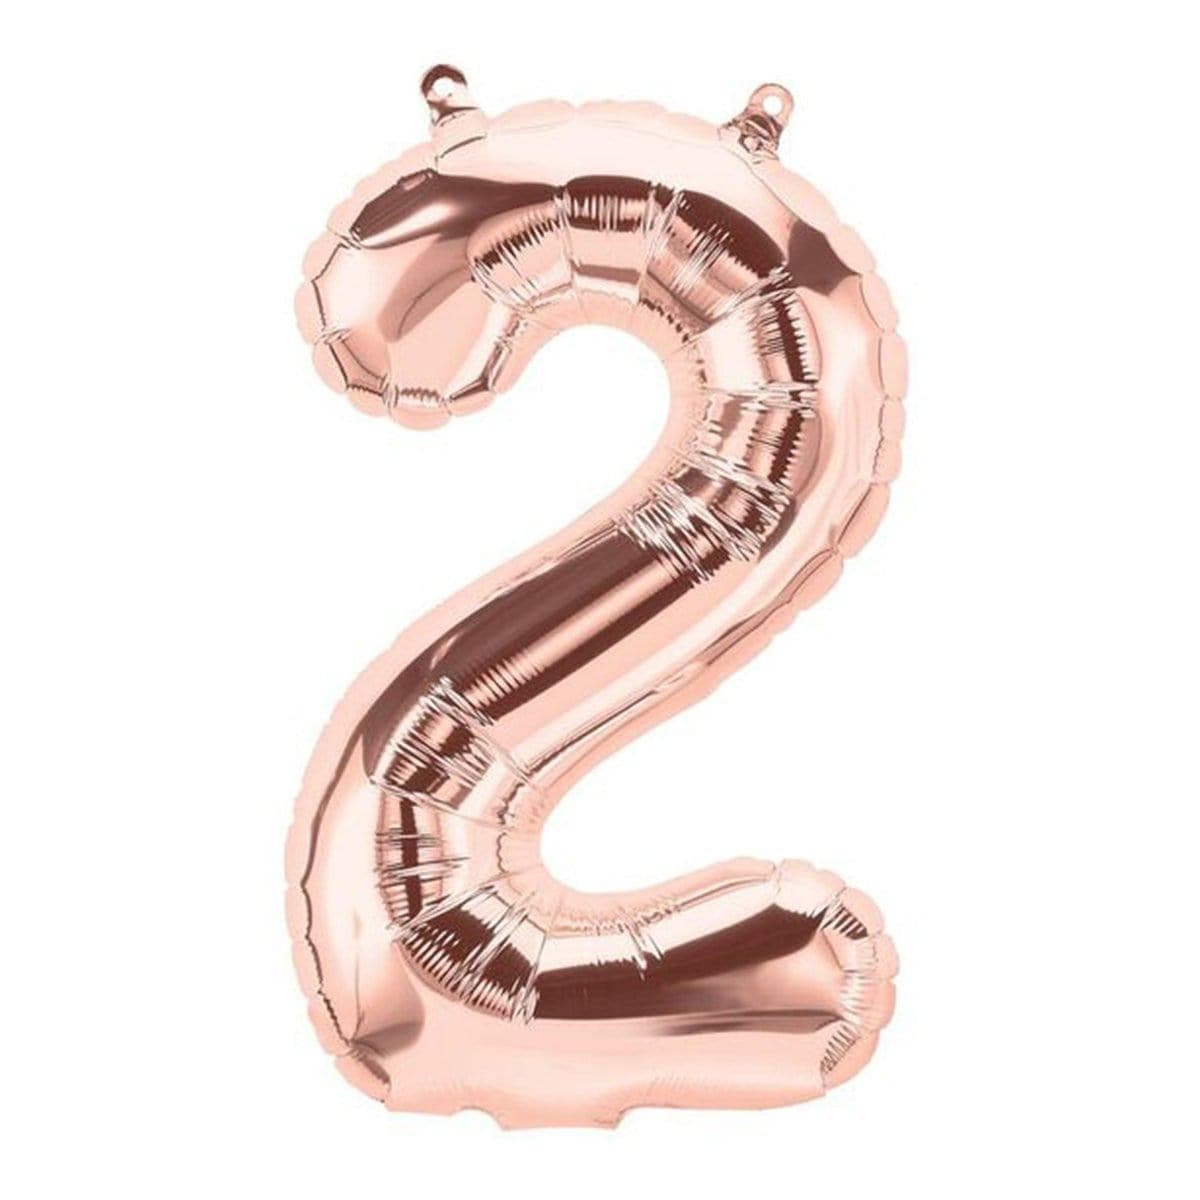 Buy Balloons Rose Gold Numebr 2 Foil Balloon, 34 Inches sold at Party Expert